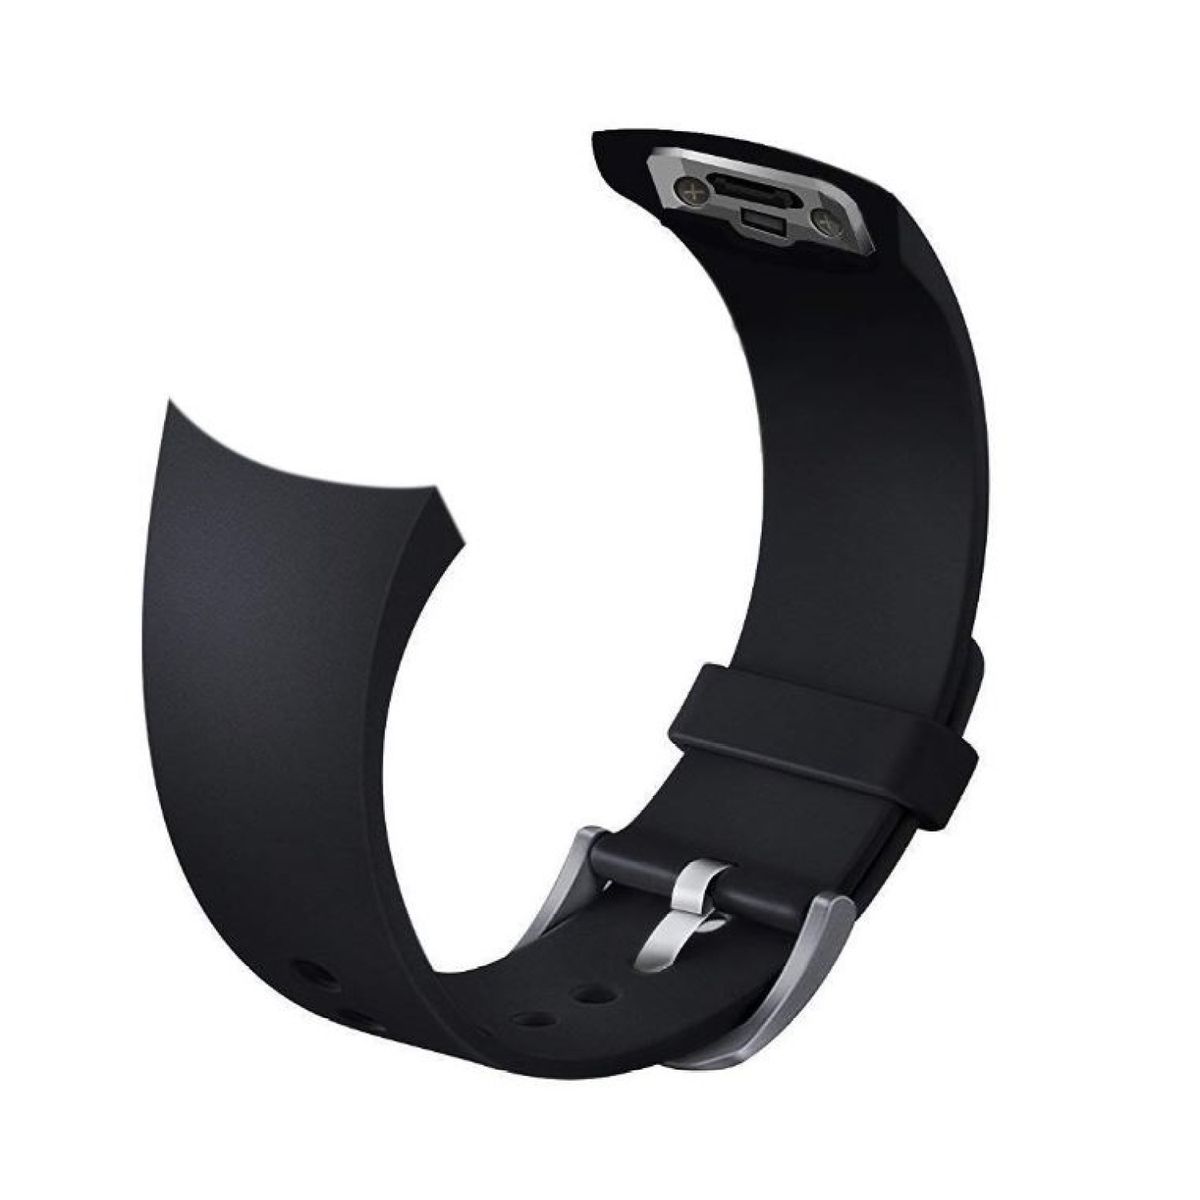 Samsung Gear S2 Replacement Watch Strap for Gear S2 SM-R720 / | Buy Online in South Africa takealot.com